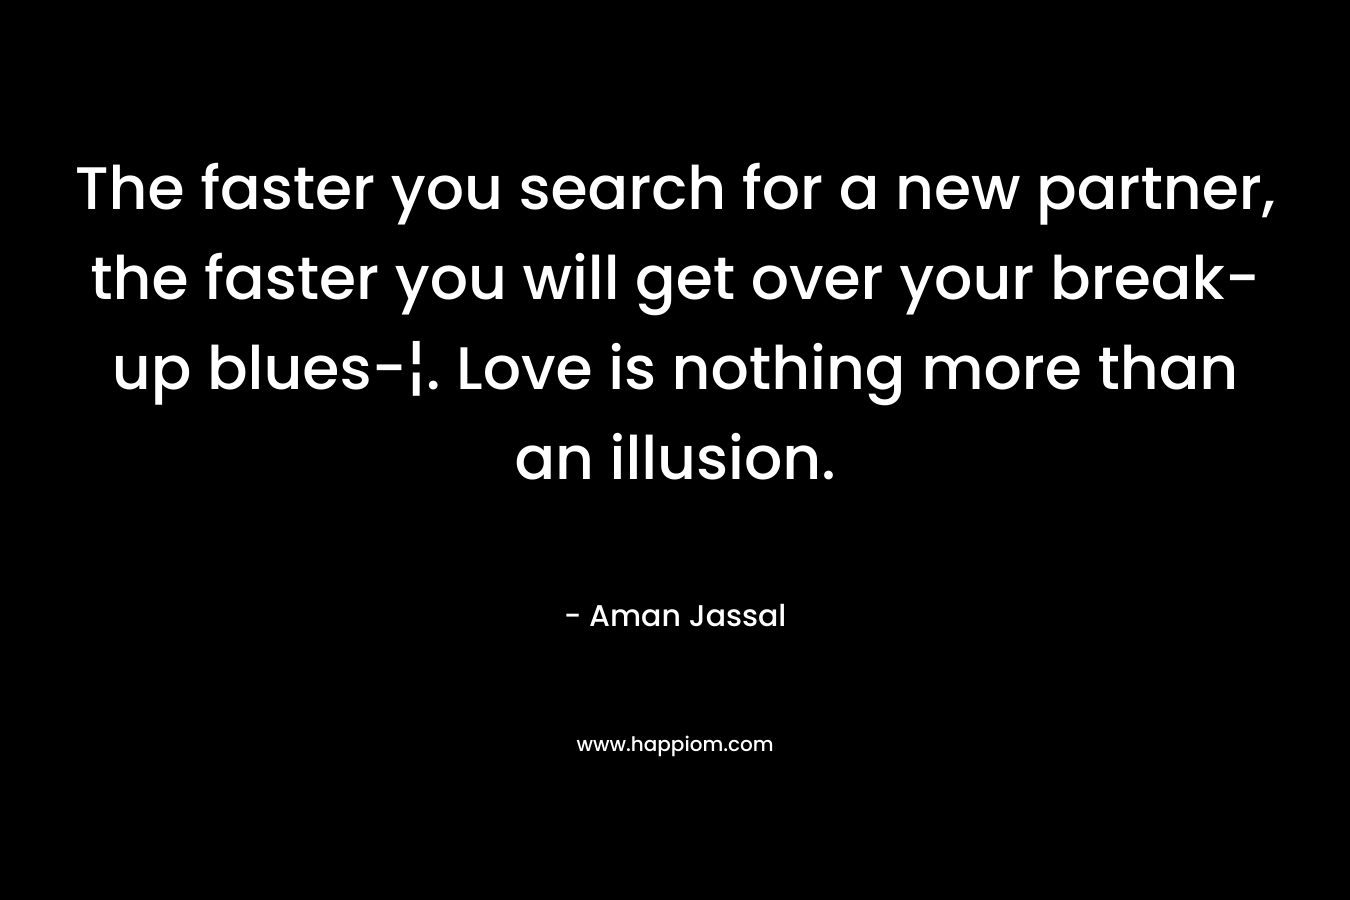 The faster you search for a new partner, the faster you will get over your break-up blues-¦. Love is nothing more than an illusion. – Aman Jassal